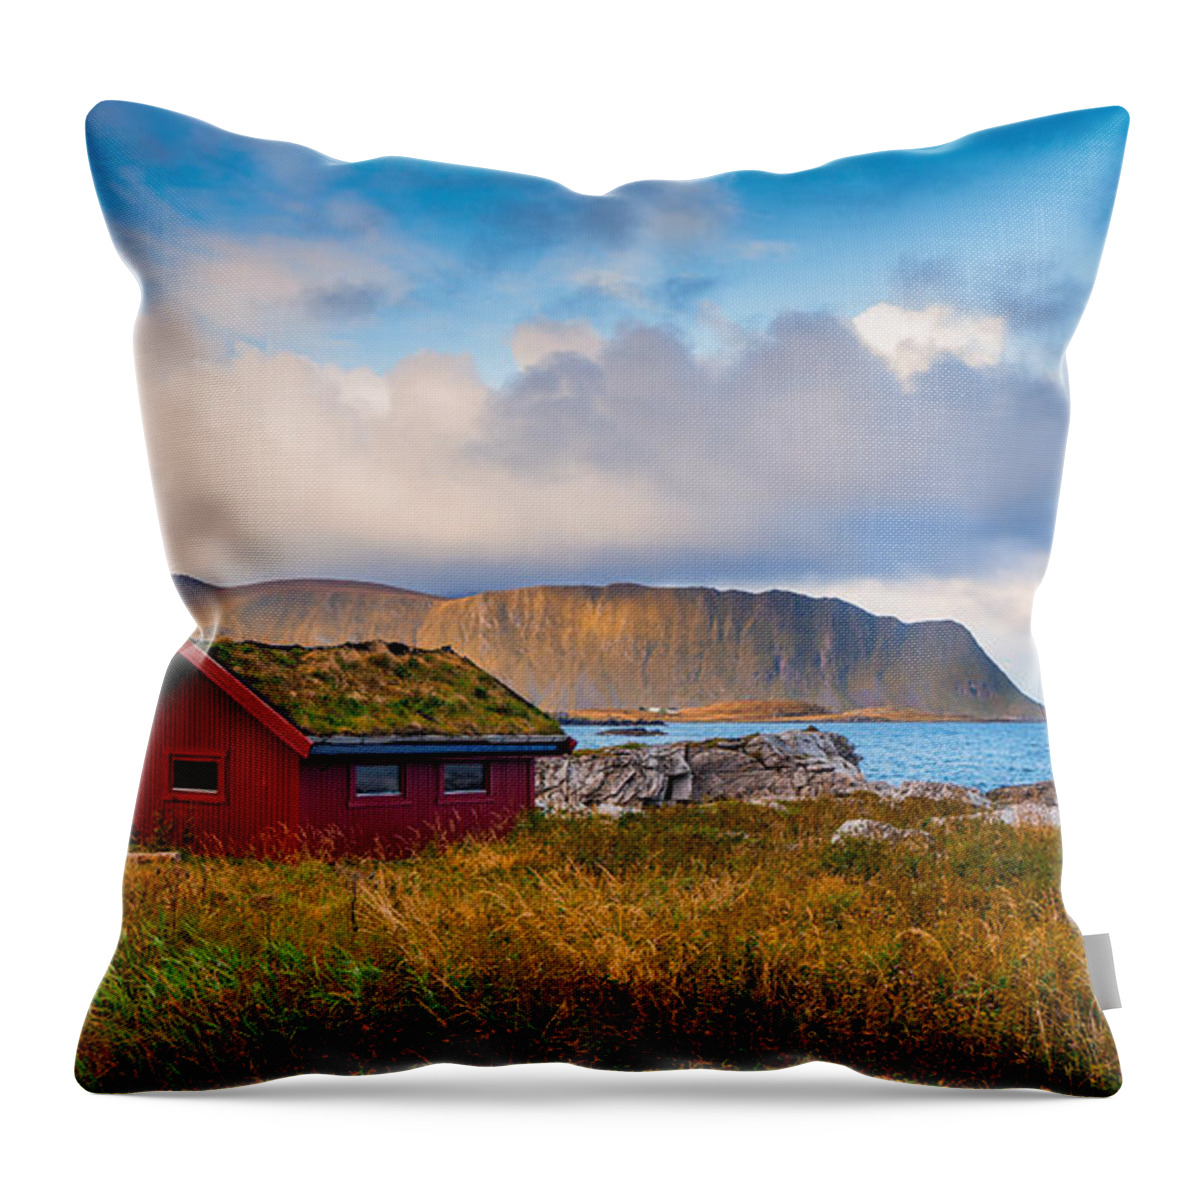 Autumn Throw Pillow featuring the photograph Ramberg Hut by James Billings